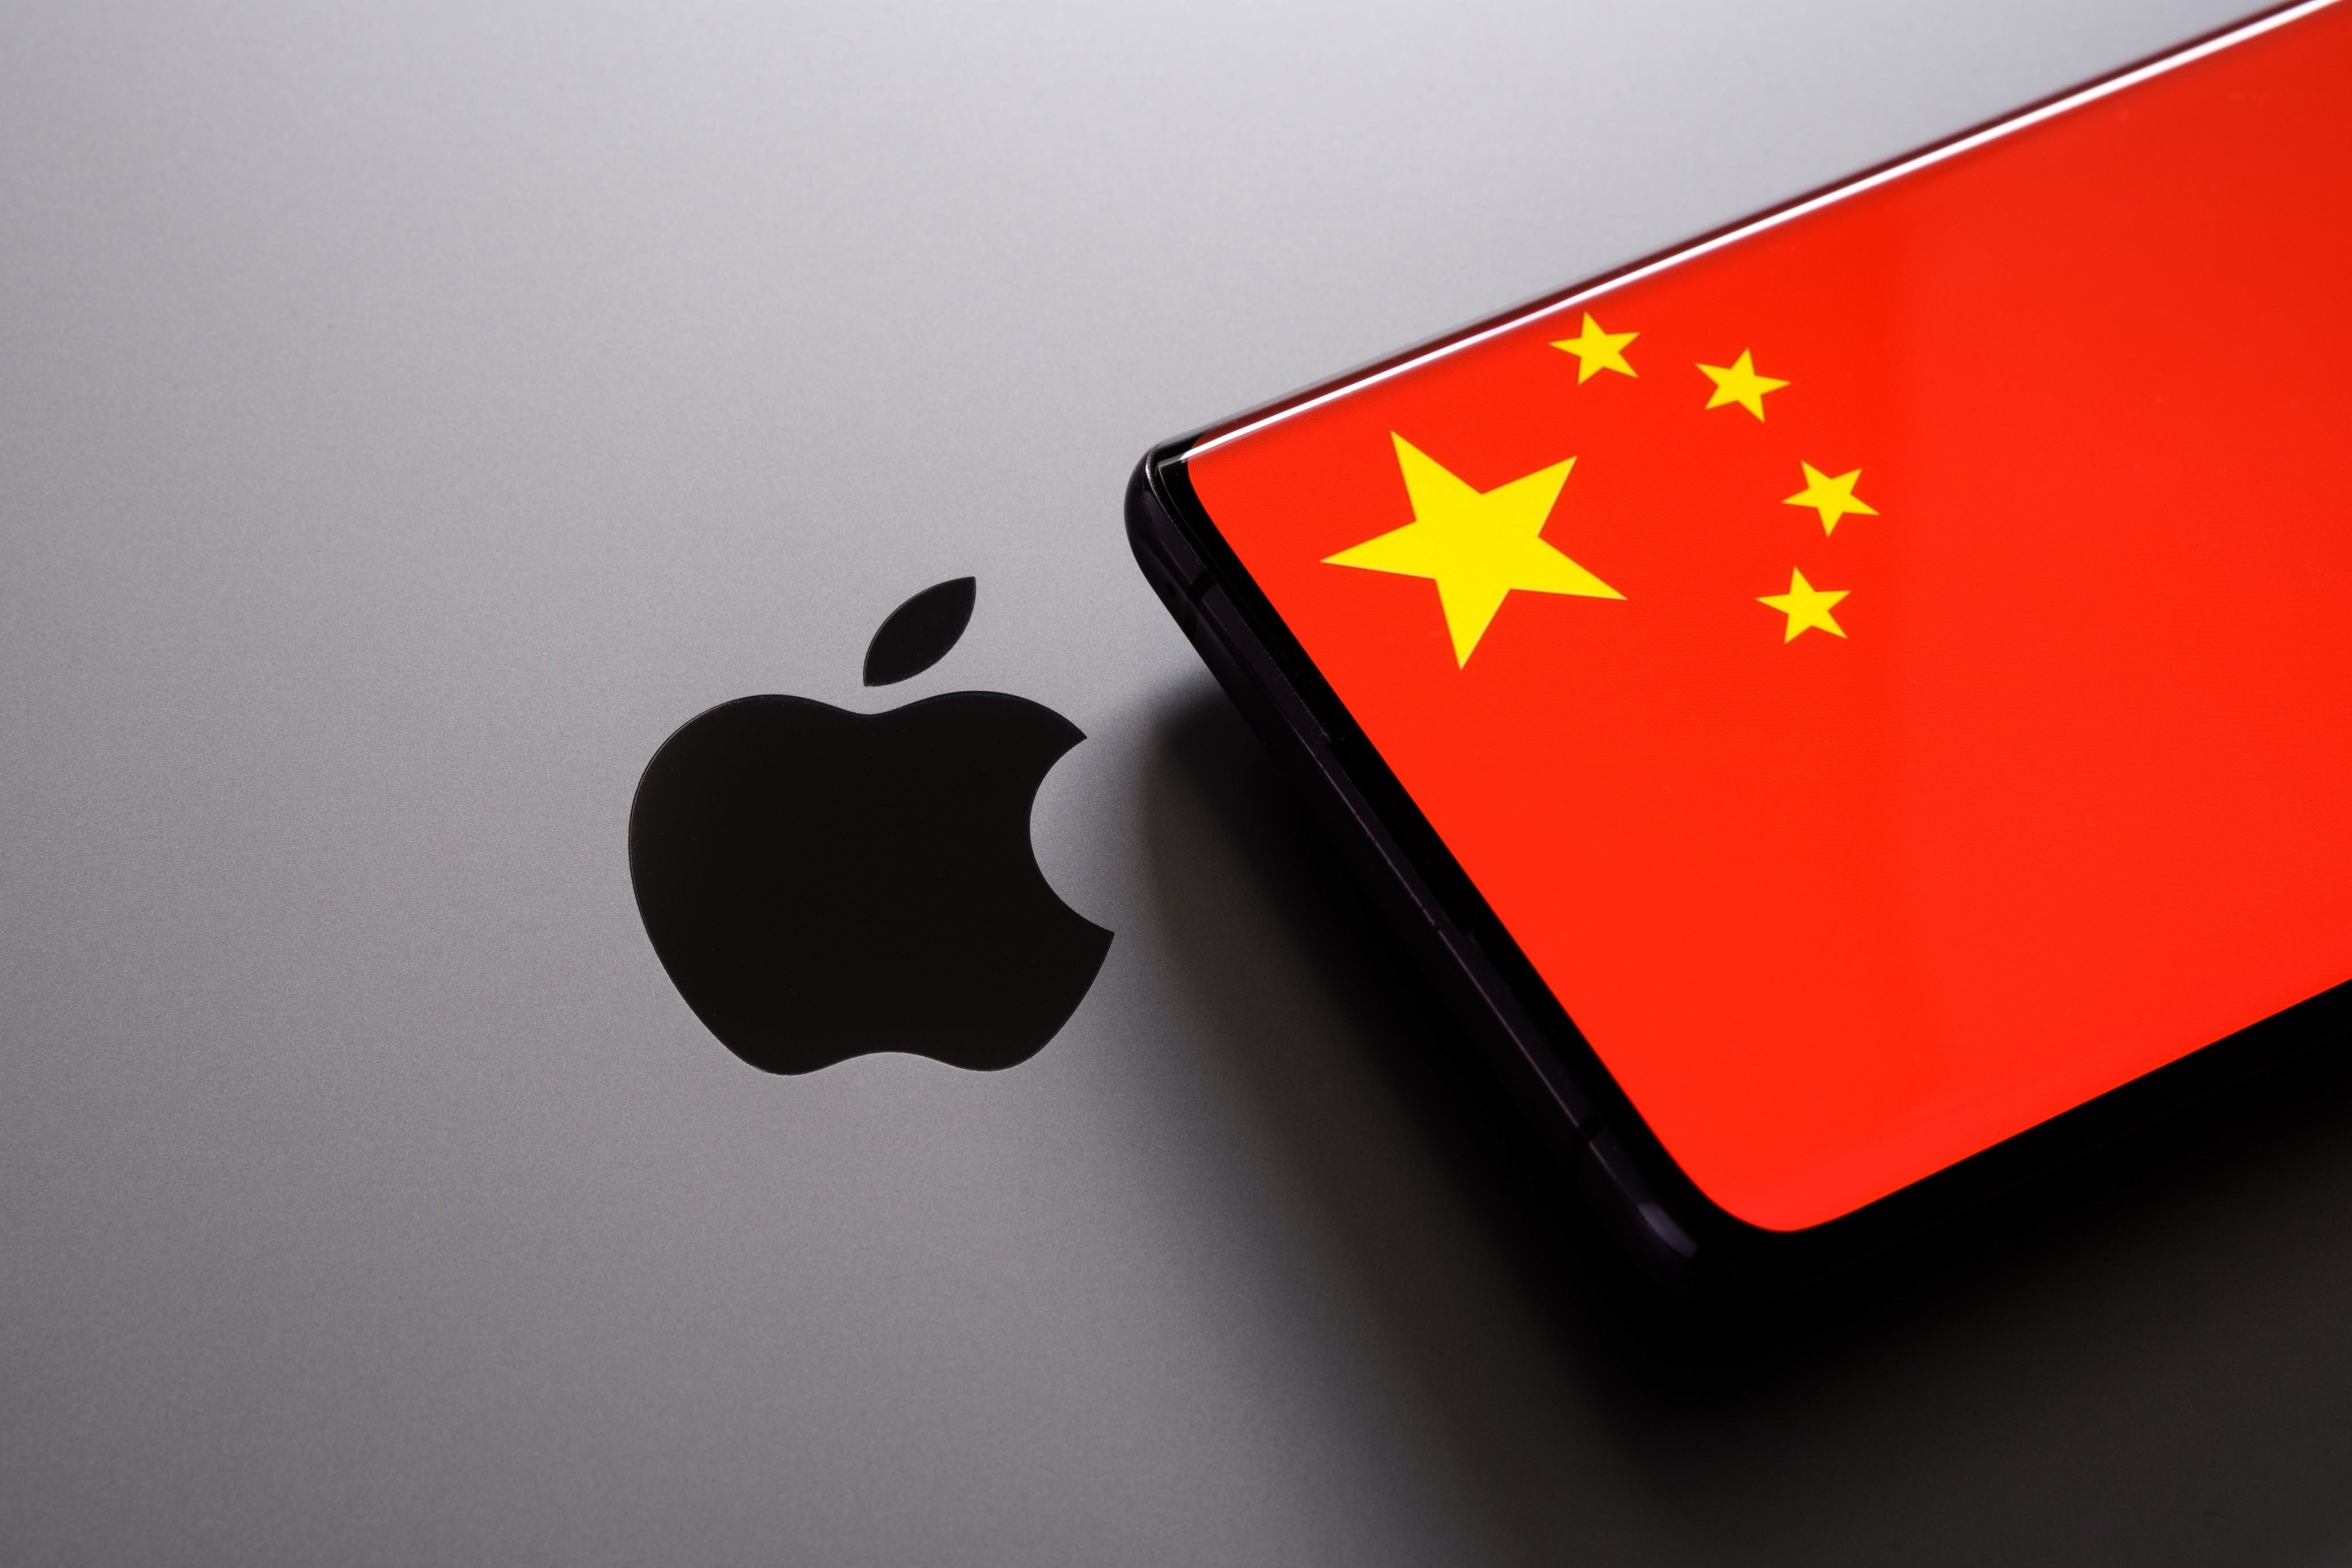 Despite slow iPhone sales, Apple still topped mainland China’s smartphone market in the fourth quarter and the whole of 2023, according to research firm IDC. Photo: Shutterstock